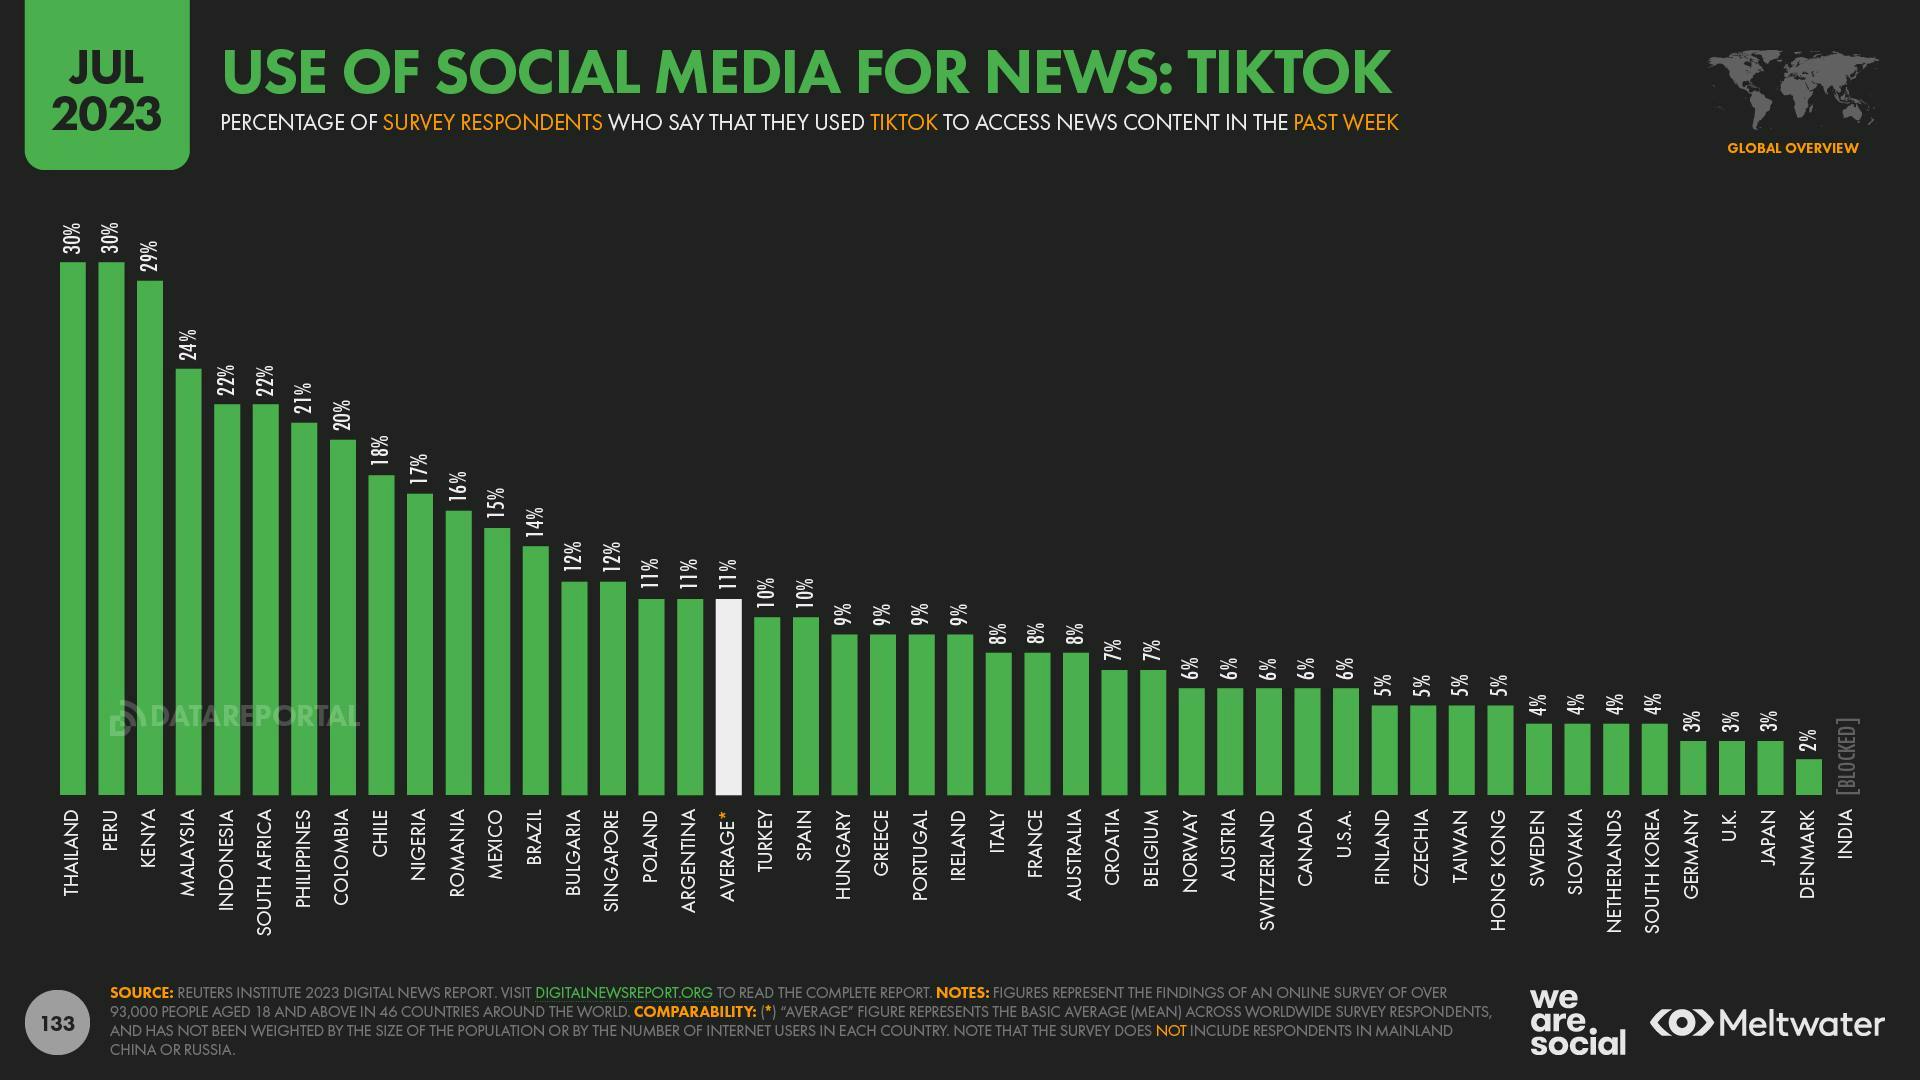 A bar chart showing the use of TikTok for news across nations. 